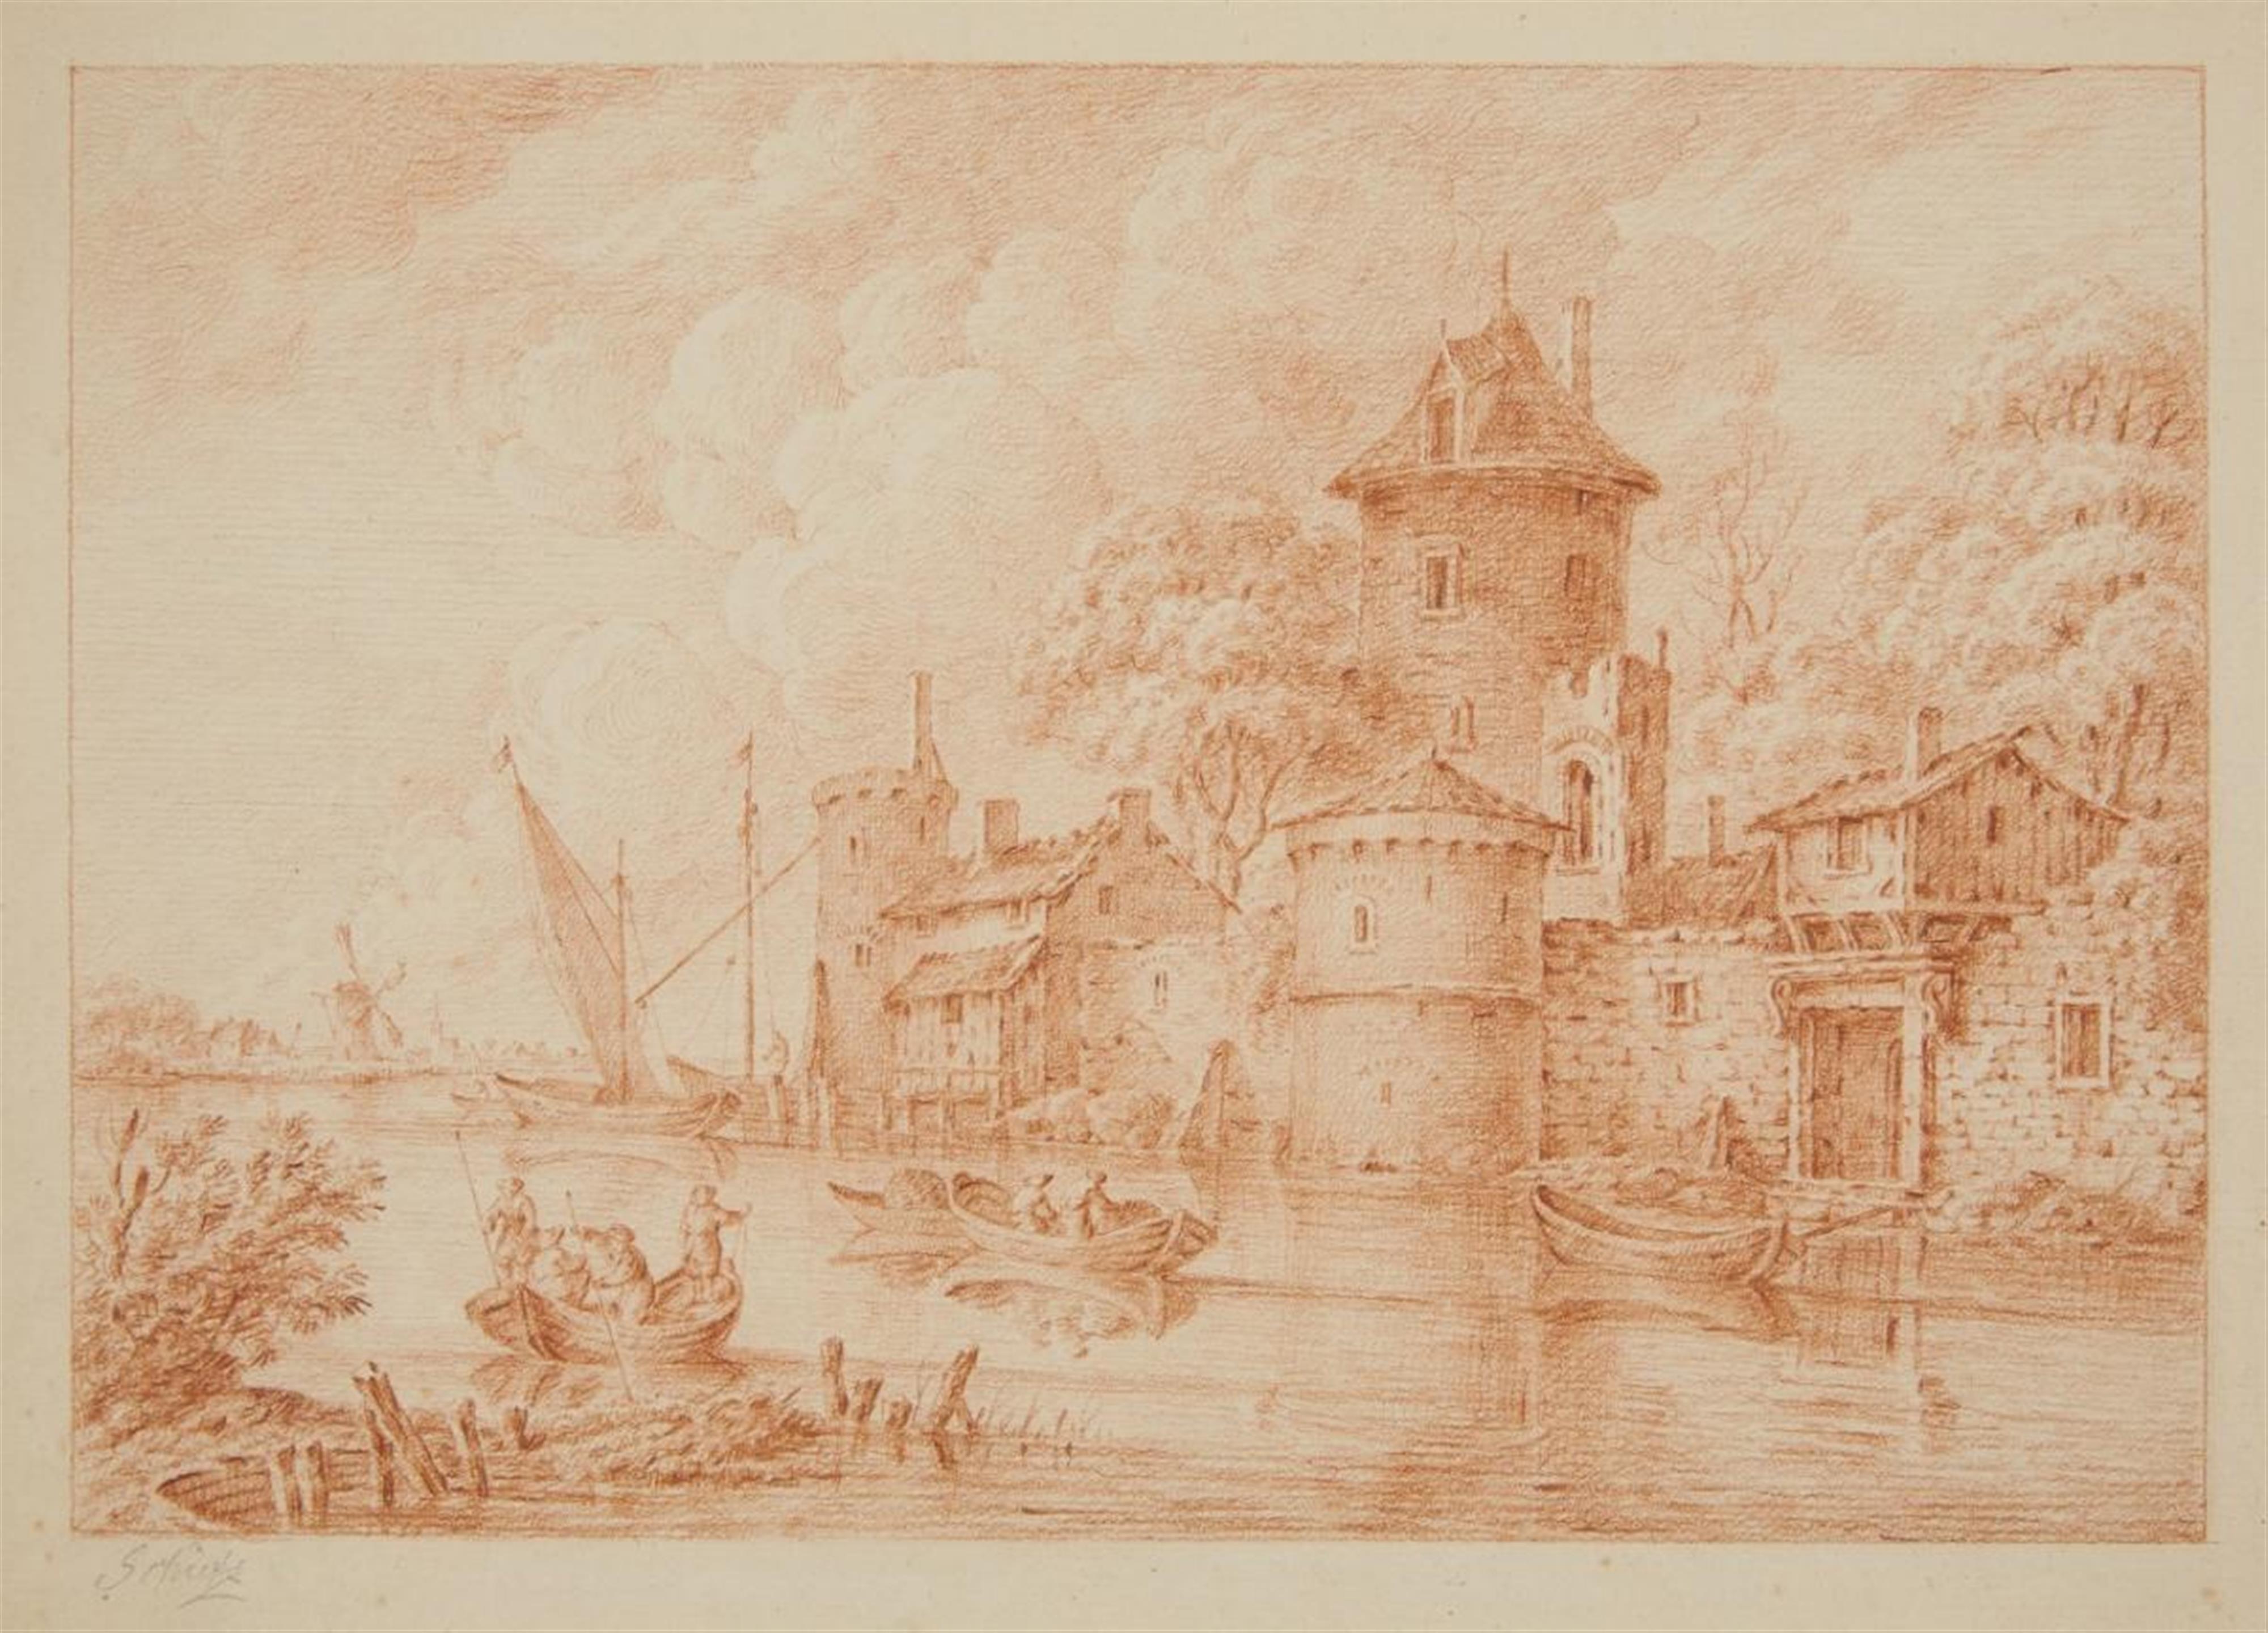 Unknown Artist, probably of the 18th century - River Landscape with a Fortified Tower and Cargo Boats - image-1